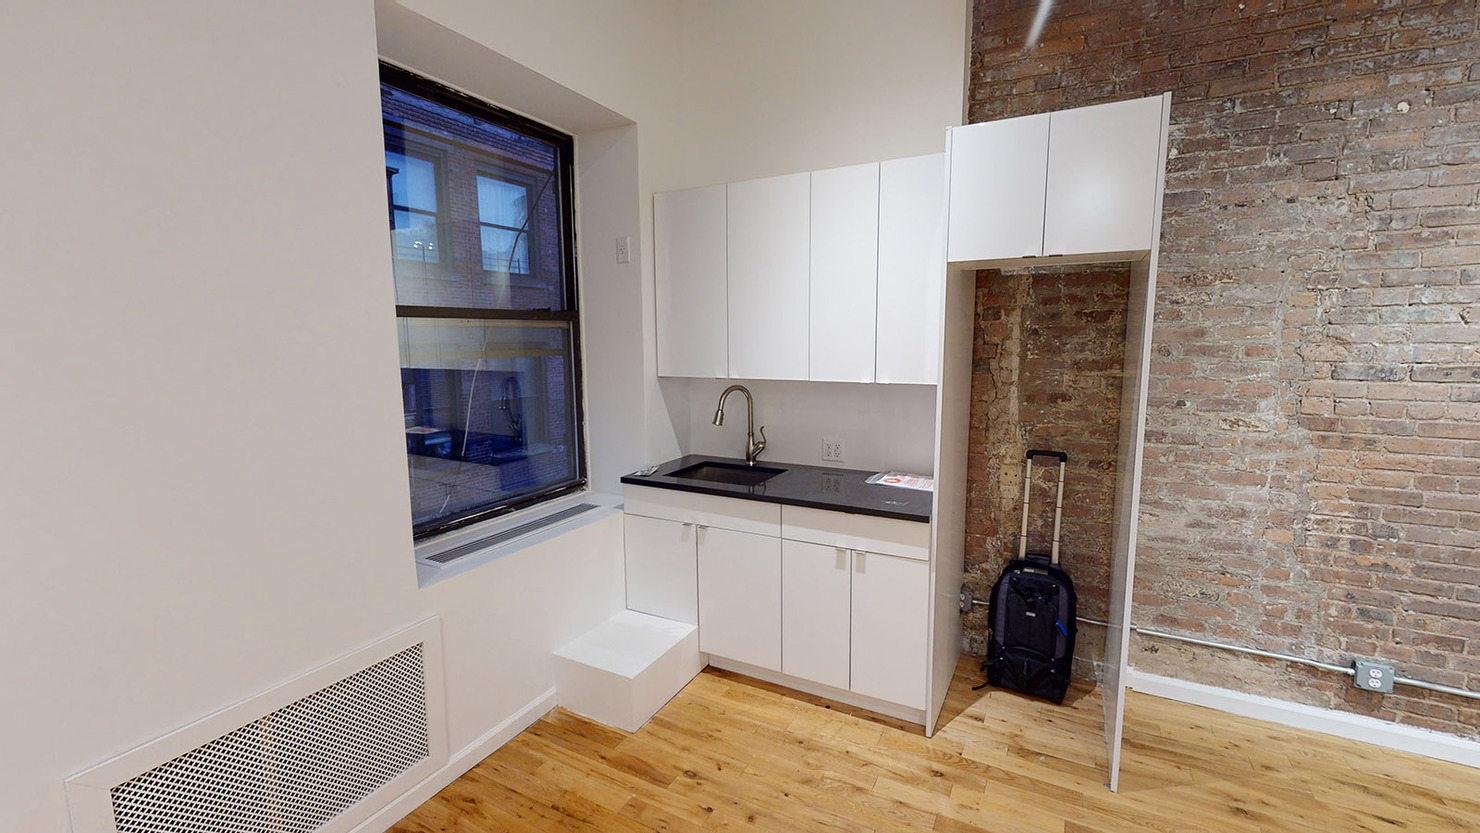 39 West 14th Street Office Space, Suite #501 - Kitchenette